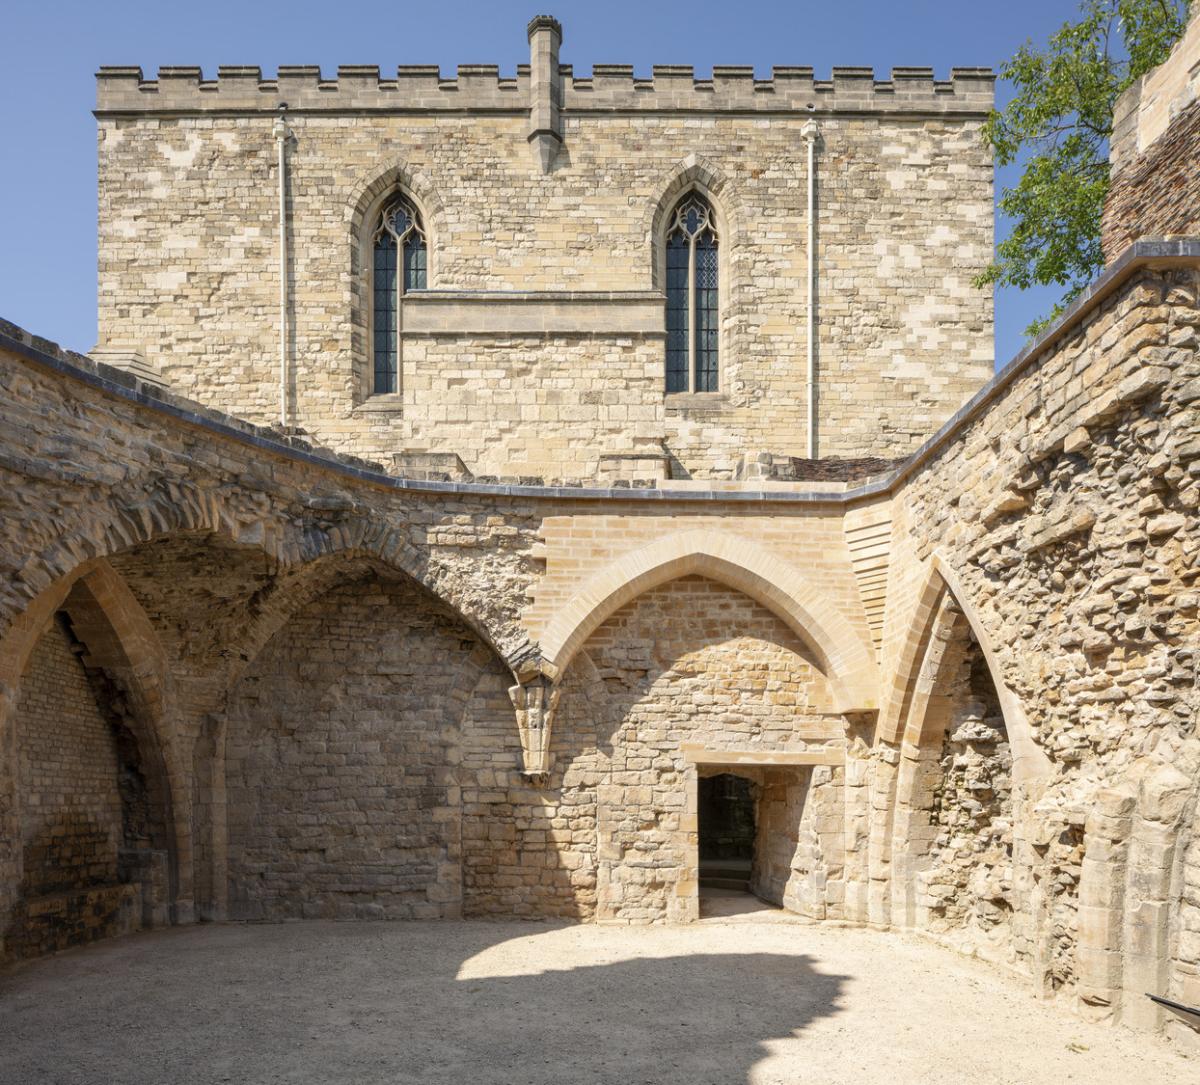 Medieval palace walls featuring reinstated archways blending medieval with new work